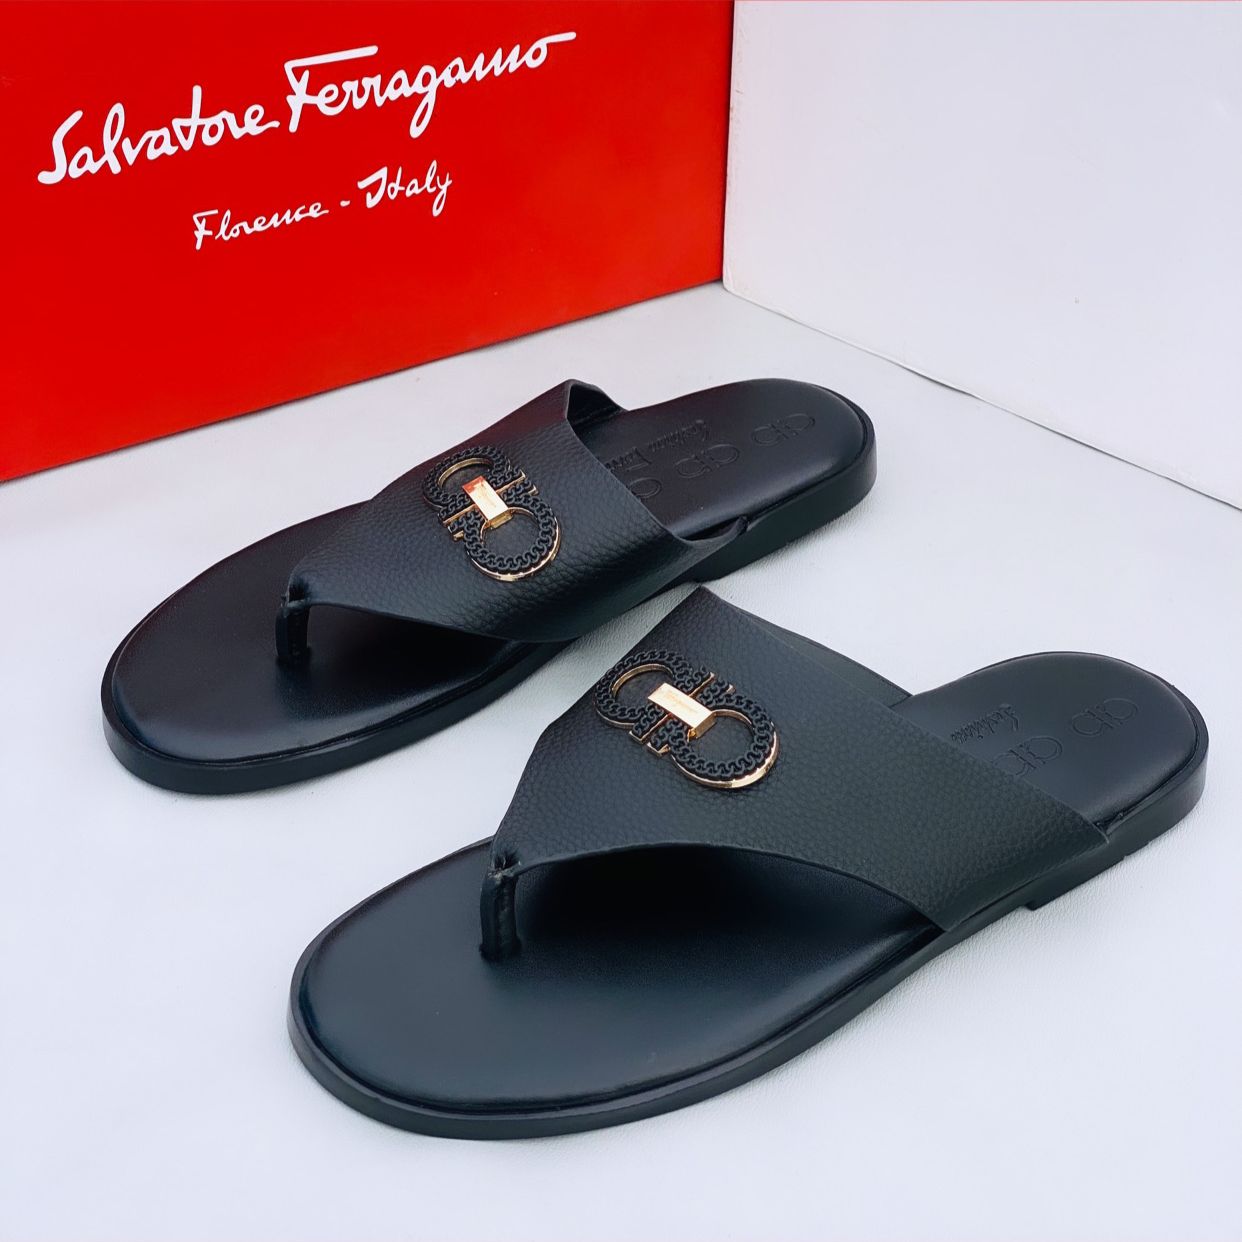 Executive Black Leather Slides | Buy Online At The Best Price In Ghana